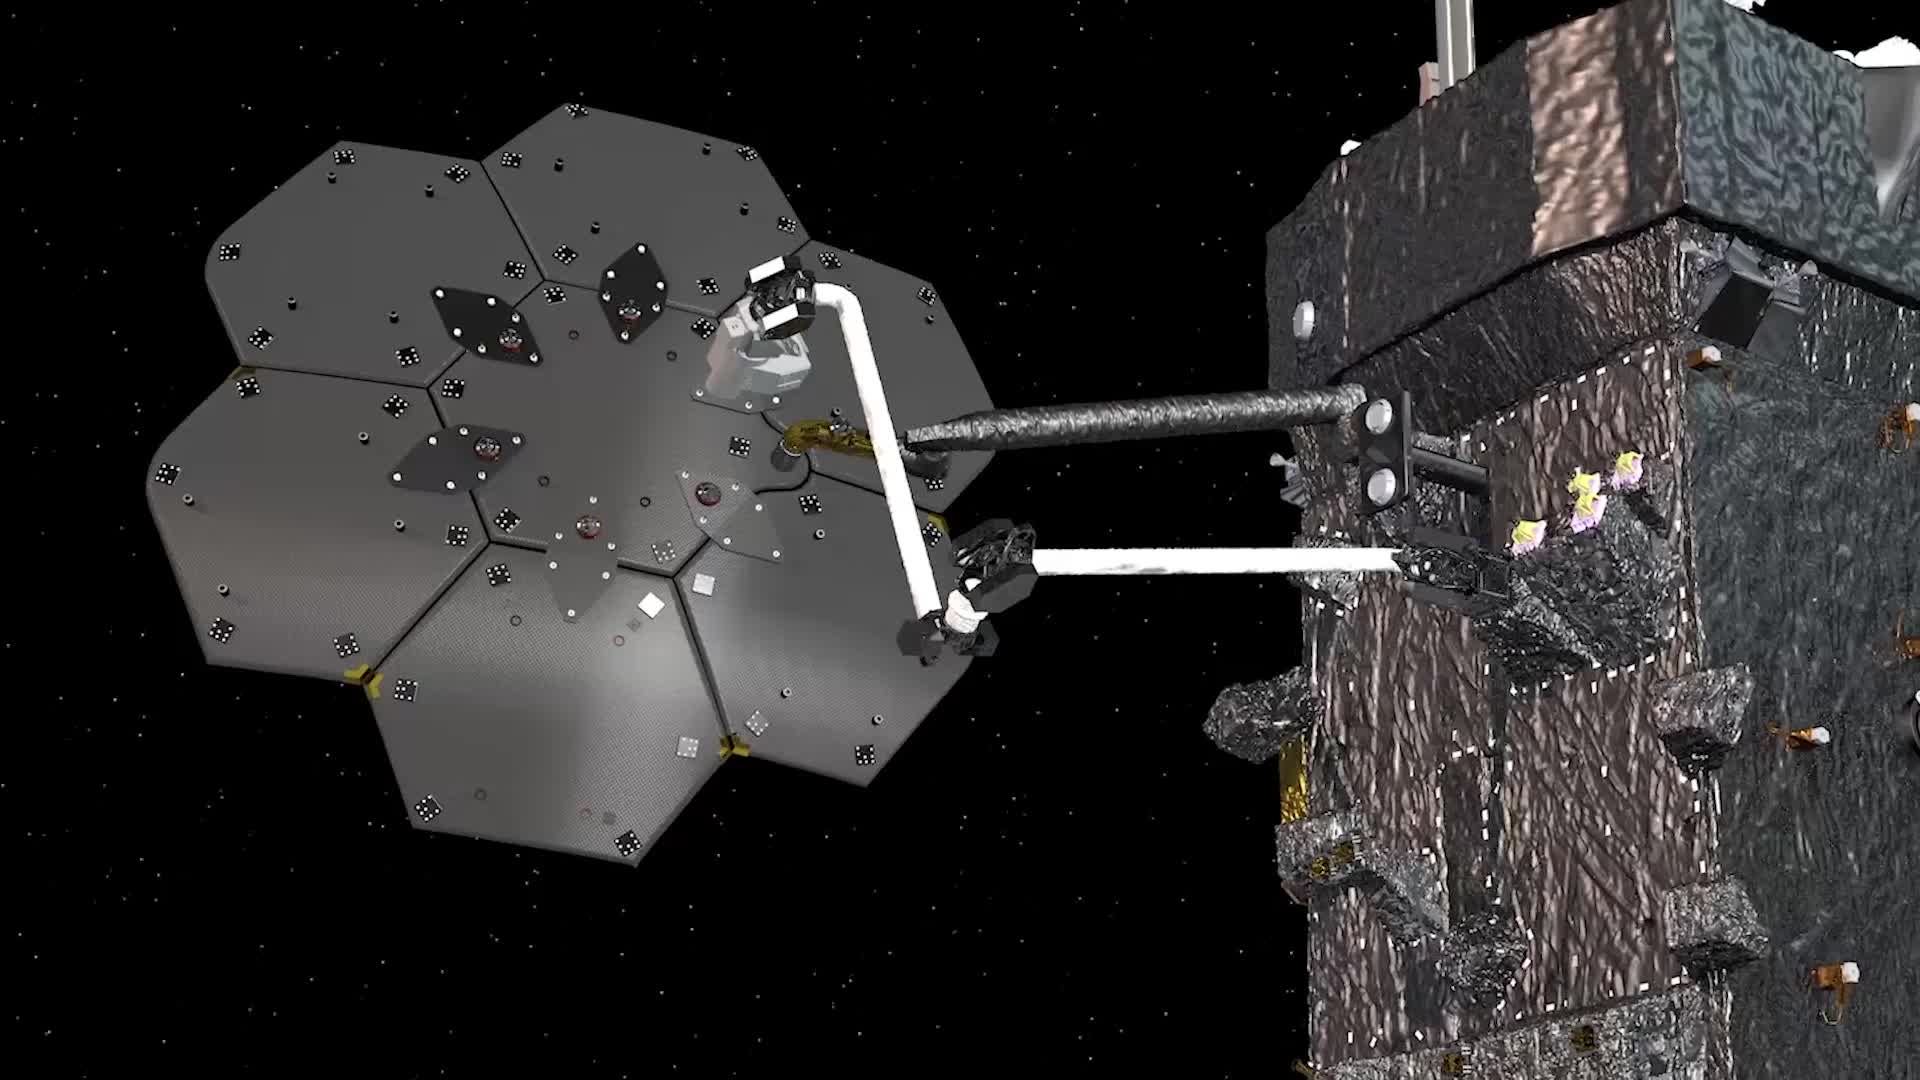 The Space Infrastructure Dexterous Robot (SPIDER) technology demonstration is set to take place on NASA’s Restore-L spacecraft